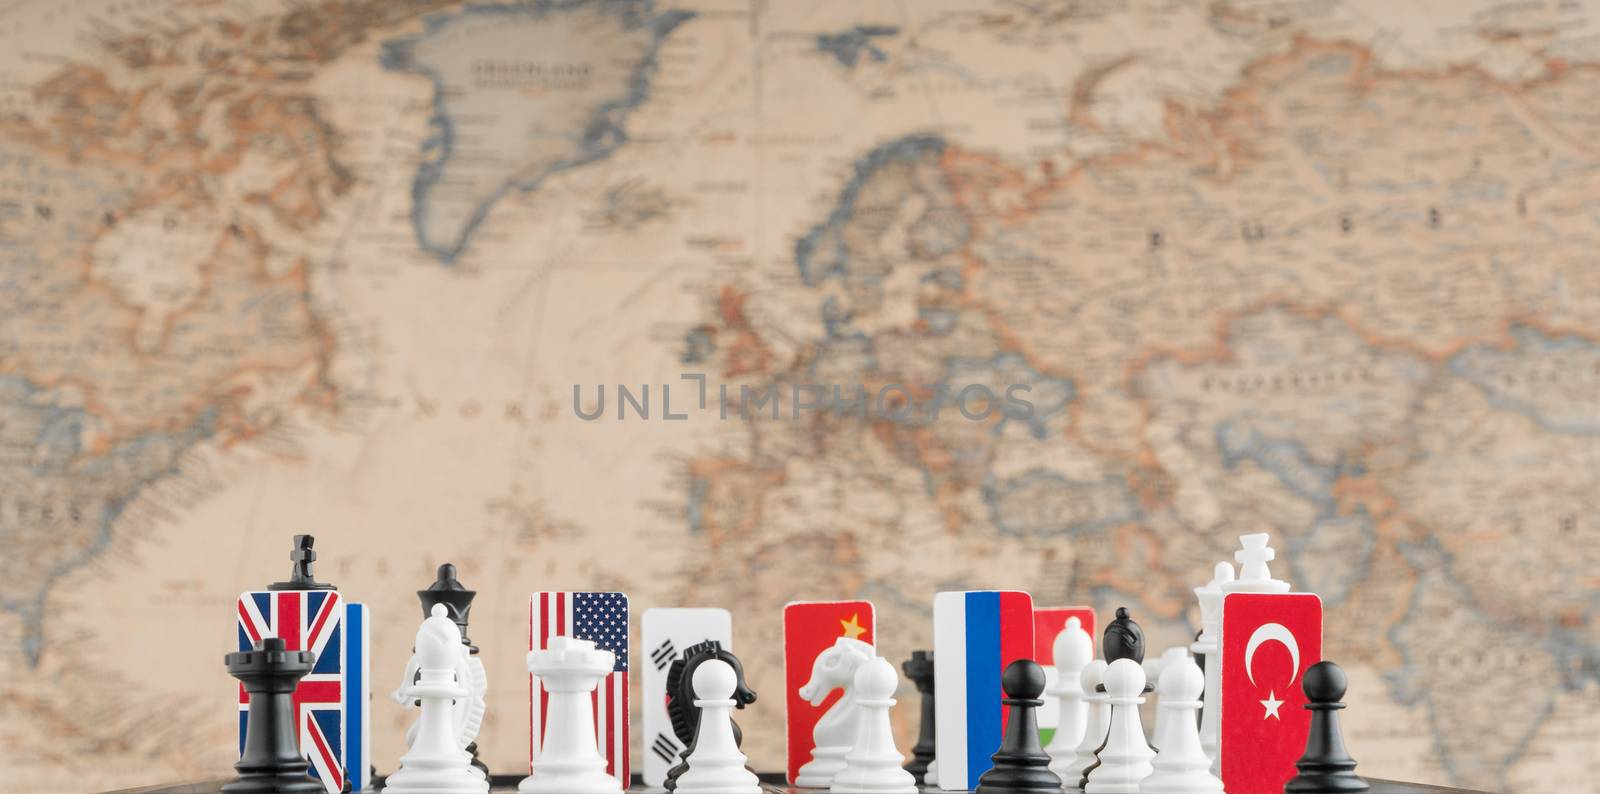 chessboard with flags of countries by A_Karim